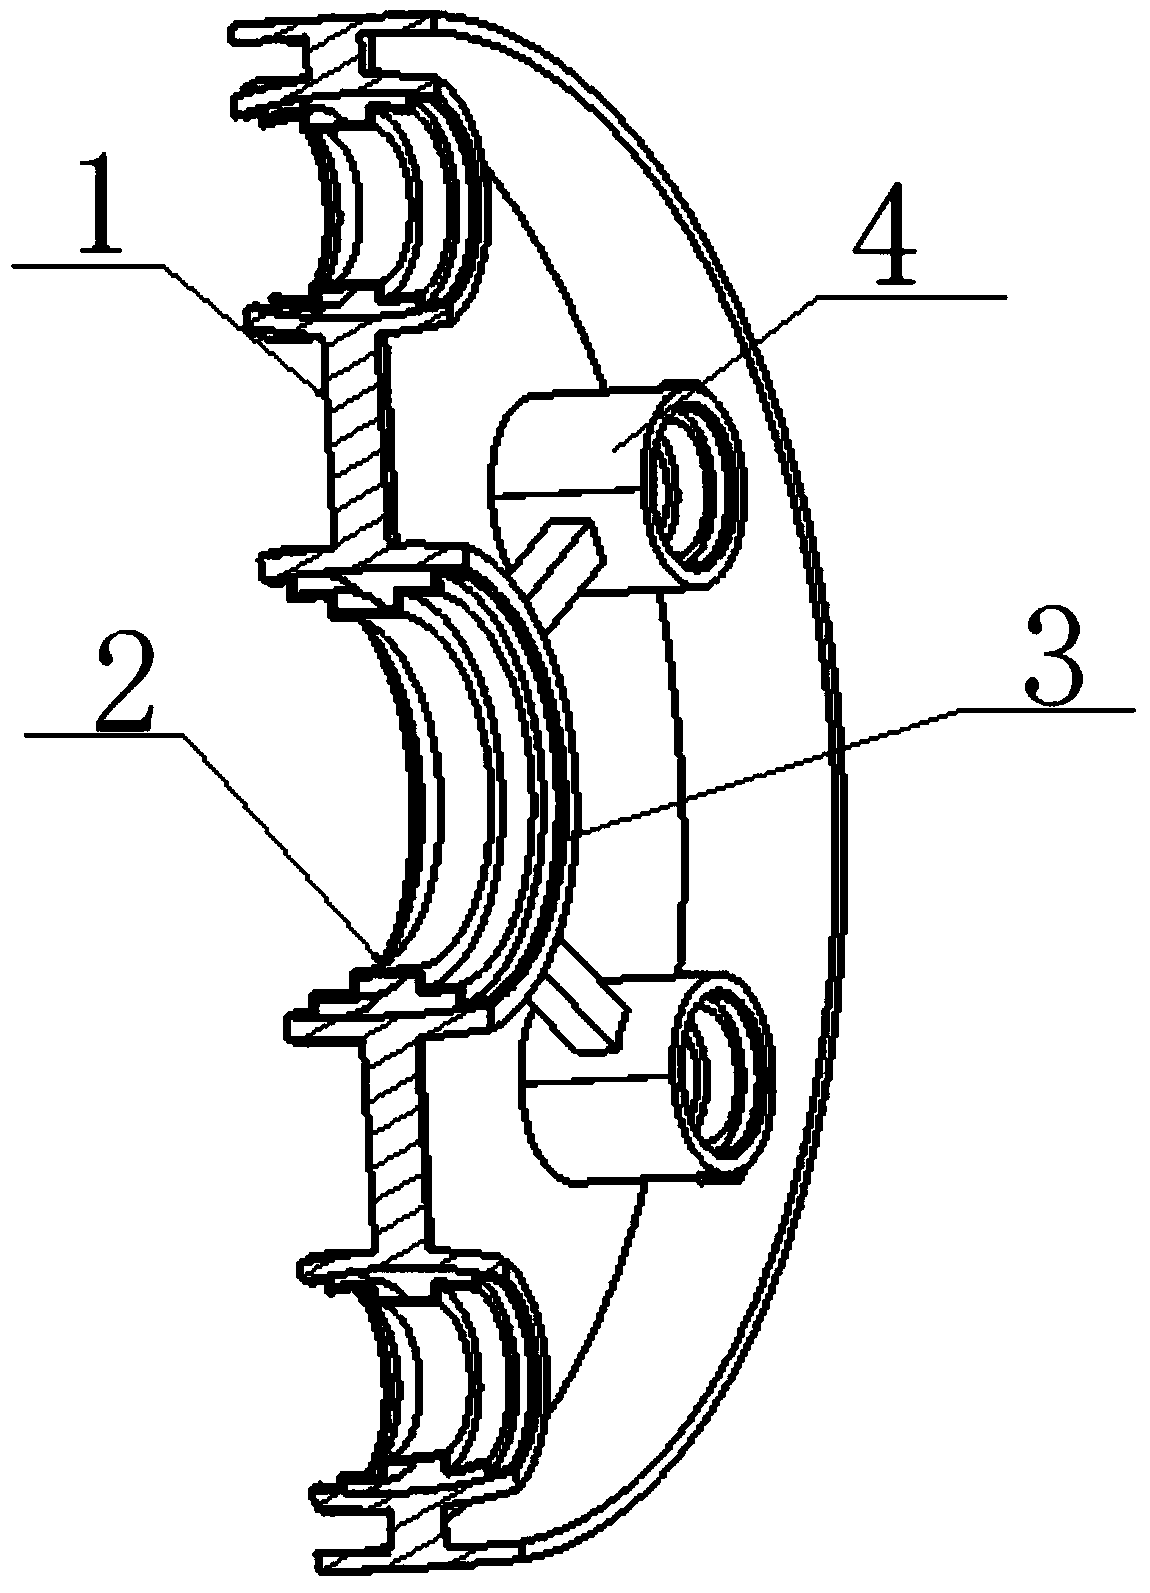 A composite pipe inner support component